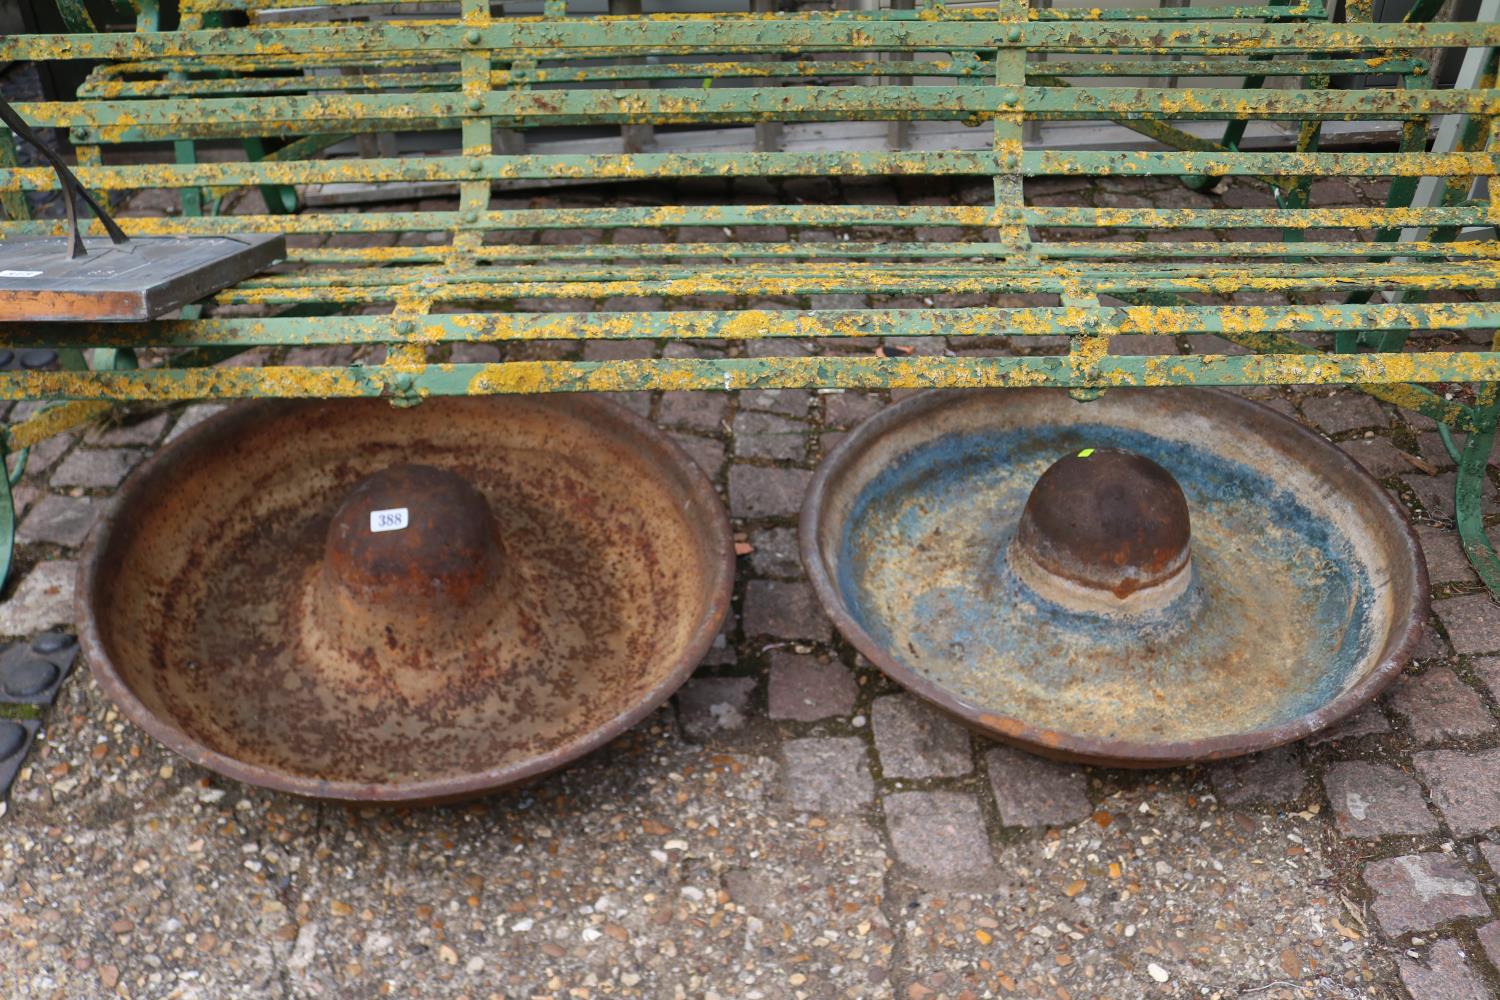 2 Mexican hat Cast Iron Pig feeders